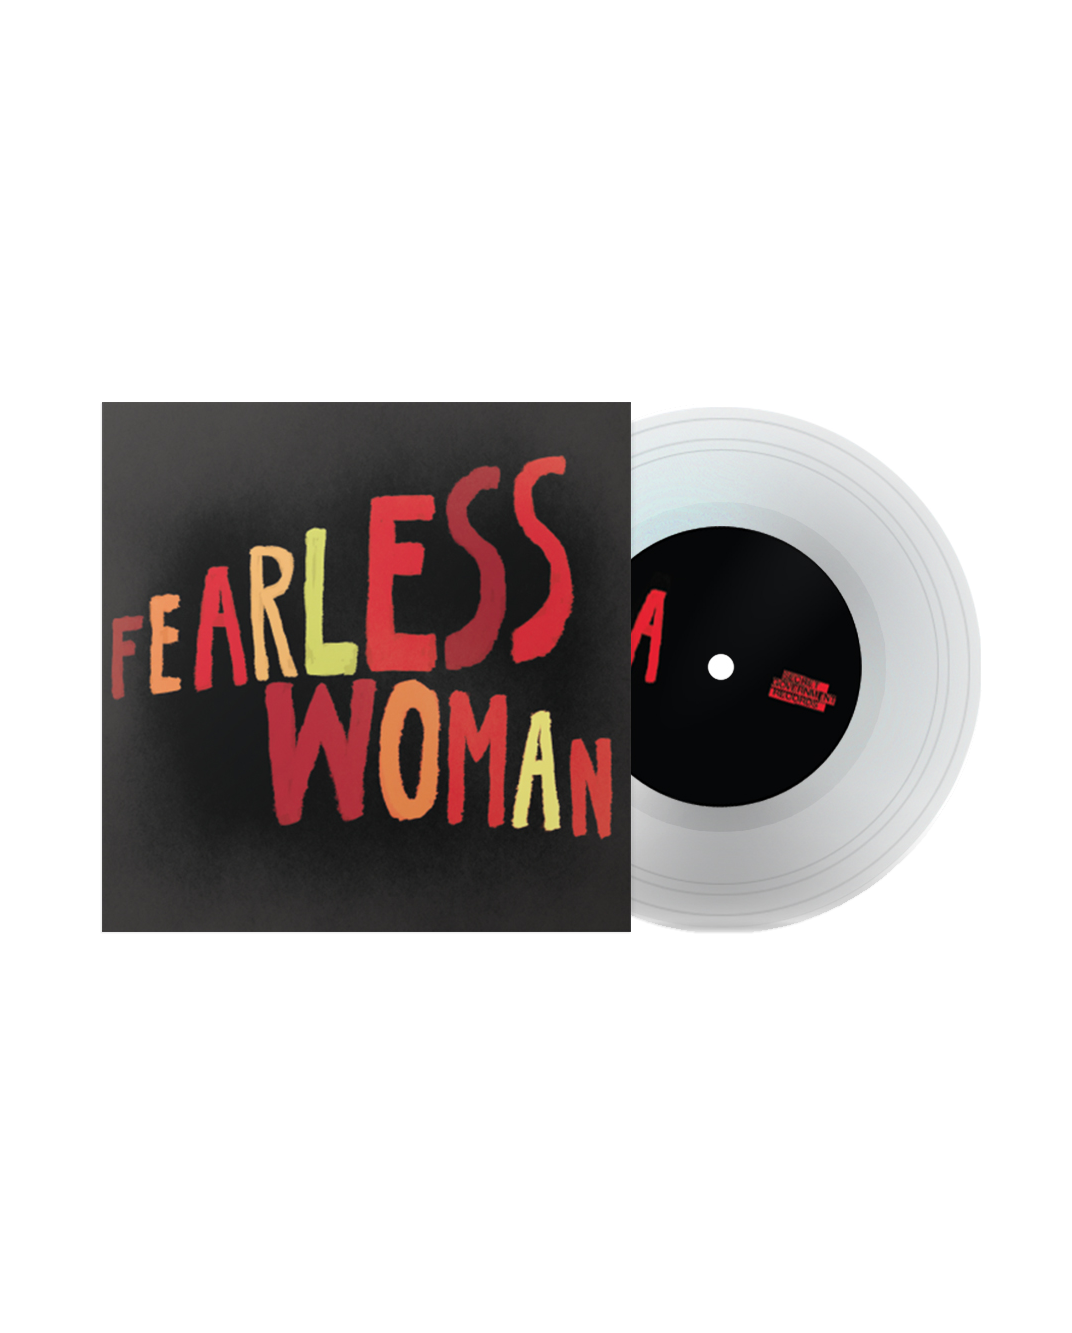 Pat Robitaille - Fearless Woman b/w Shadows 7”